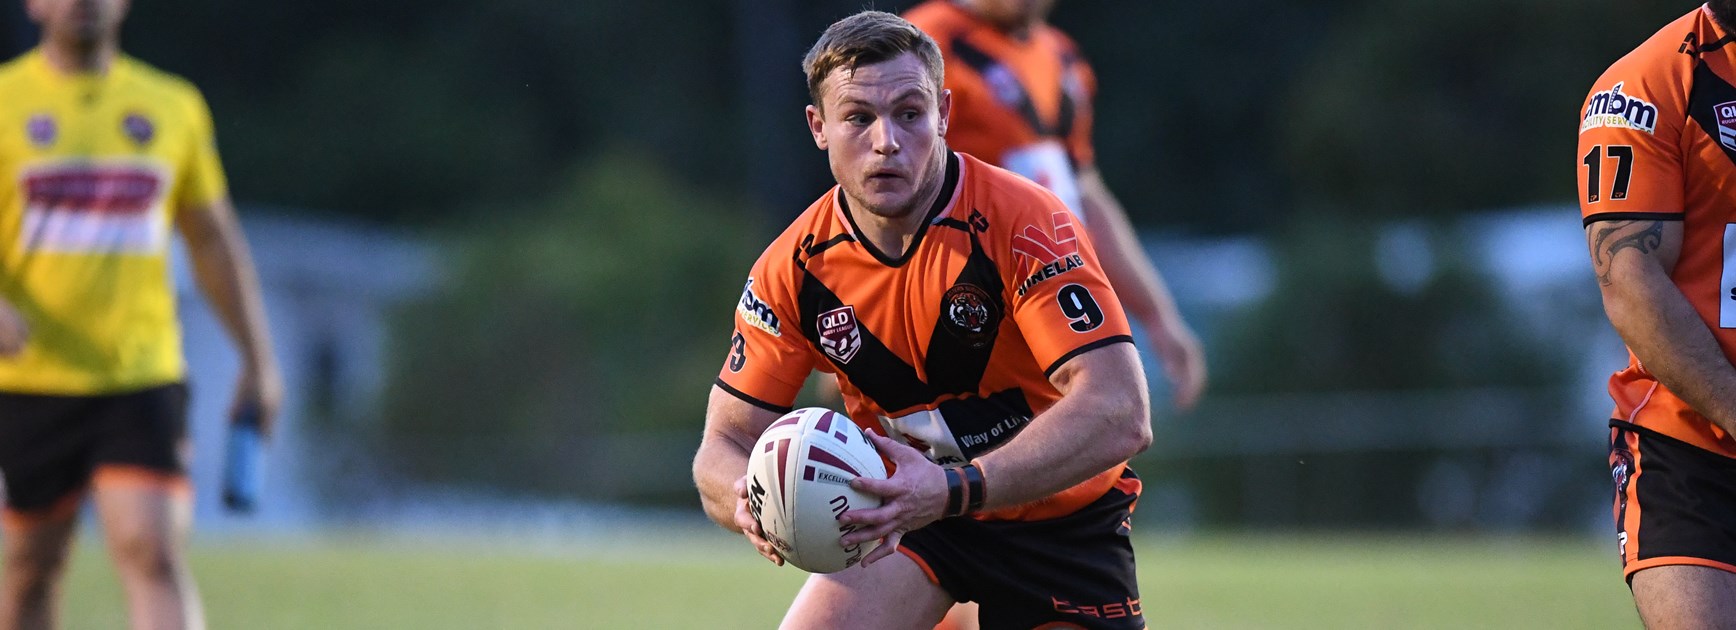 Tigers score seven tries in big win over Dolphins